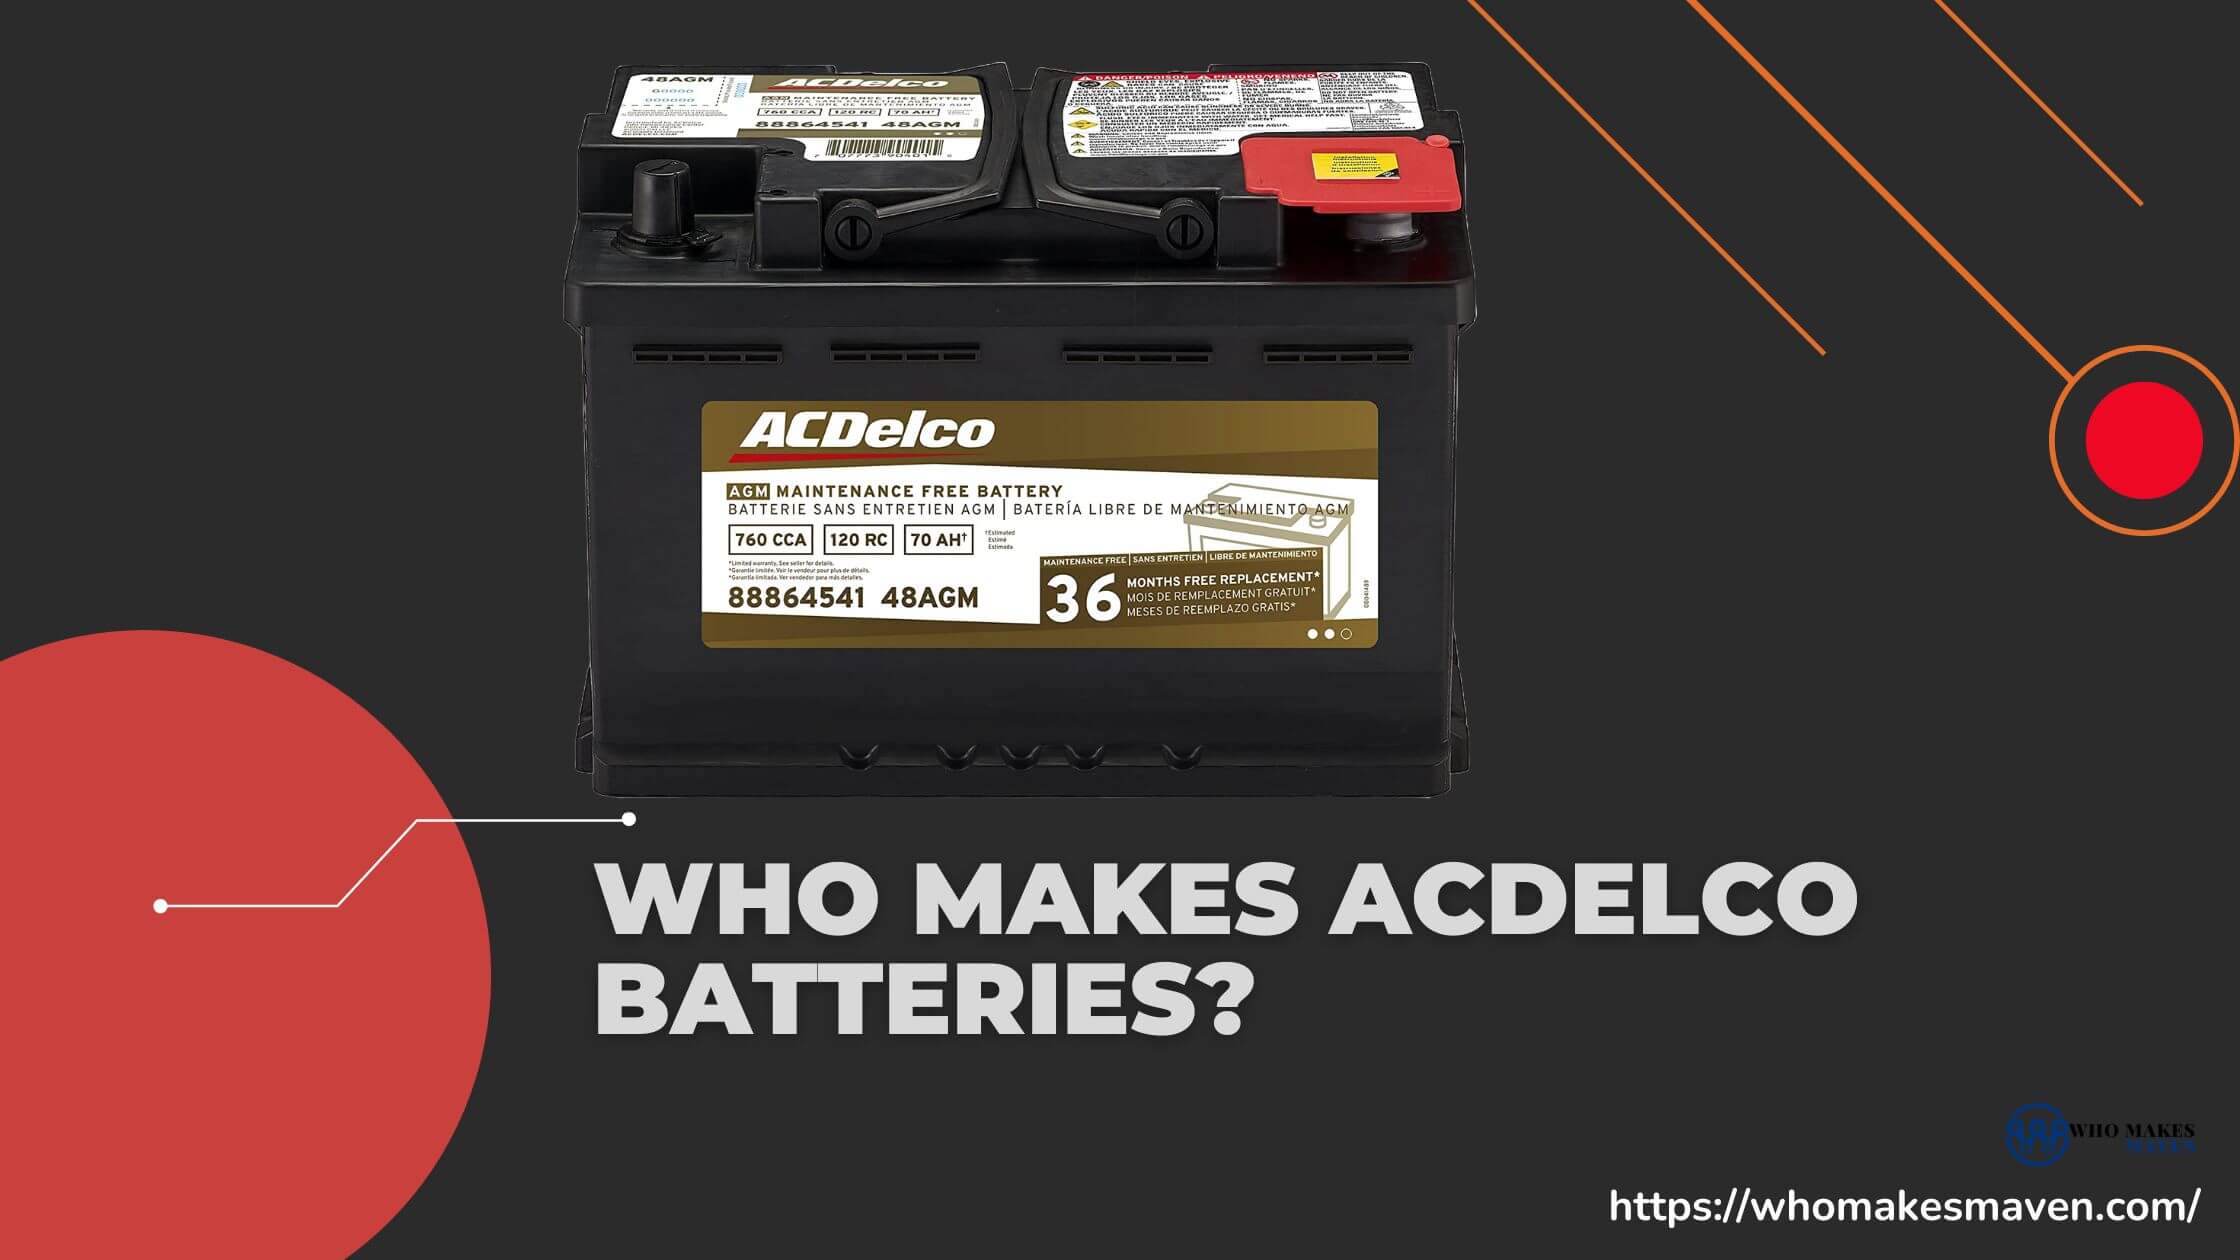 Who Makes ACDelco Batteries